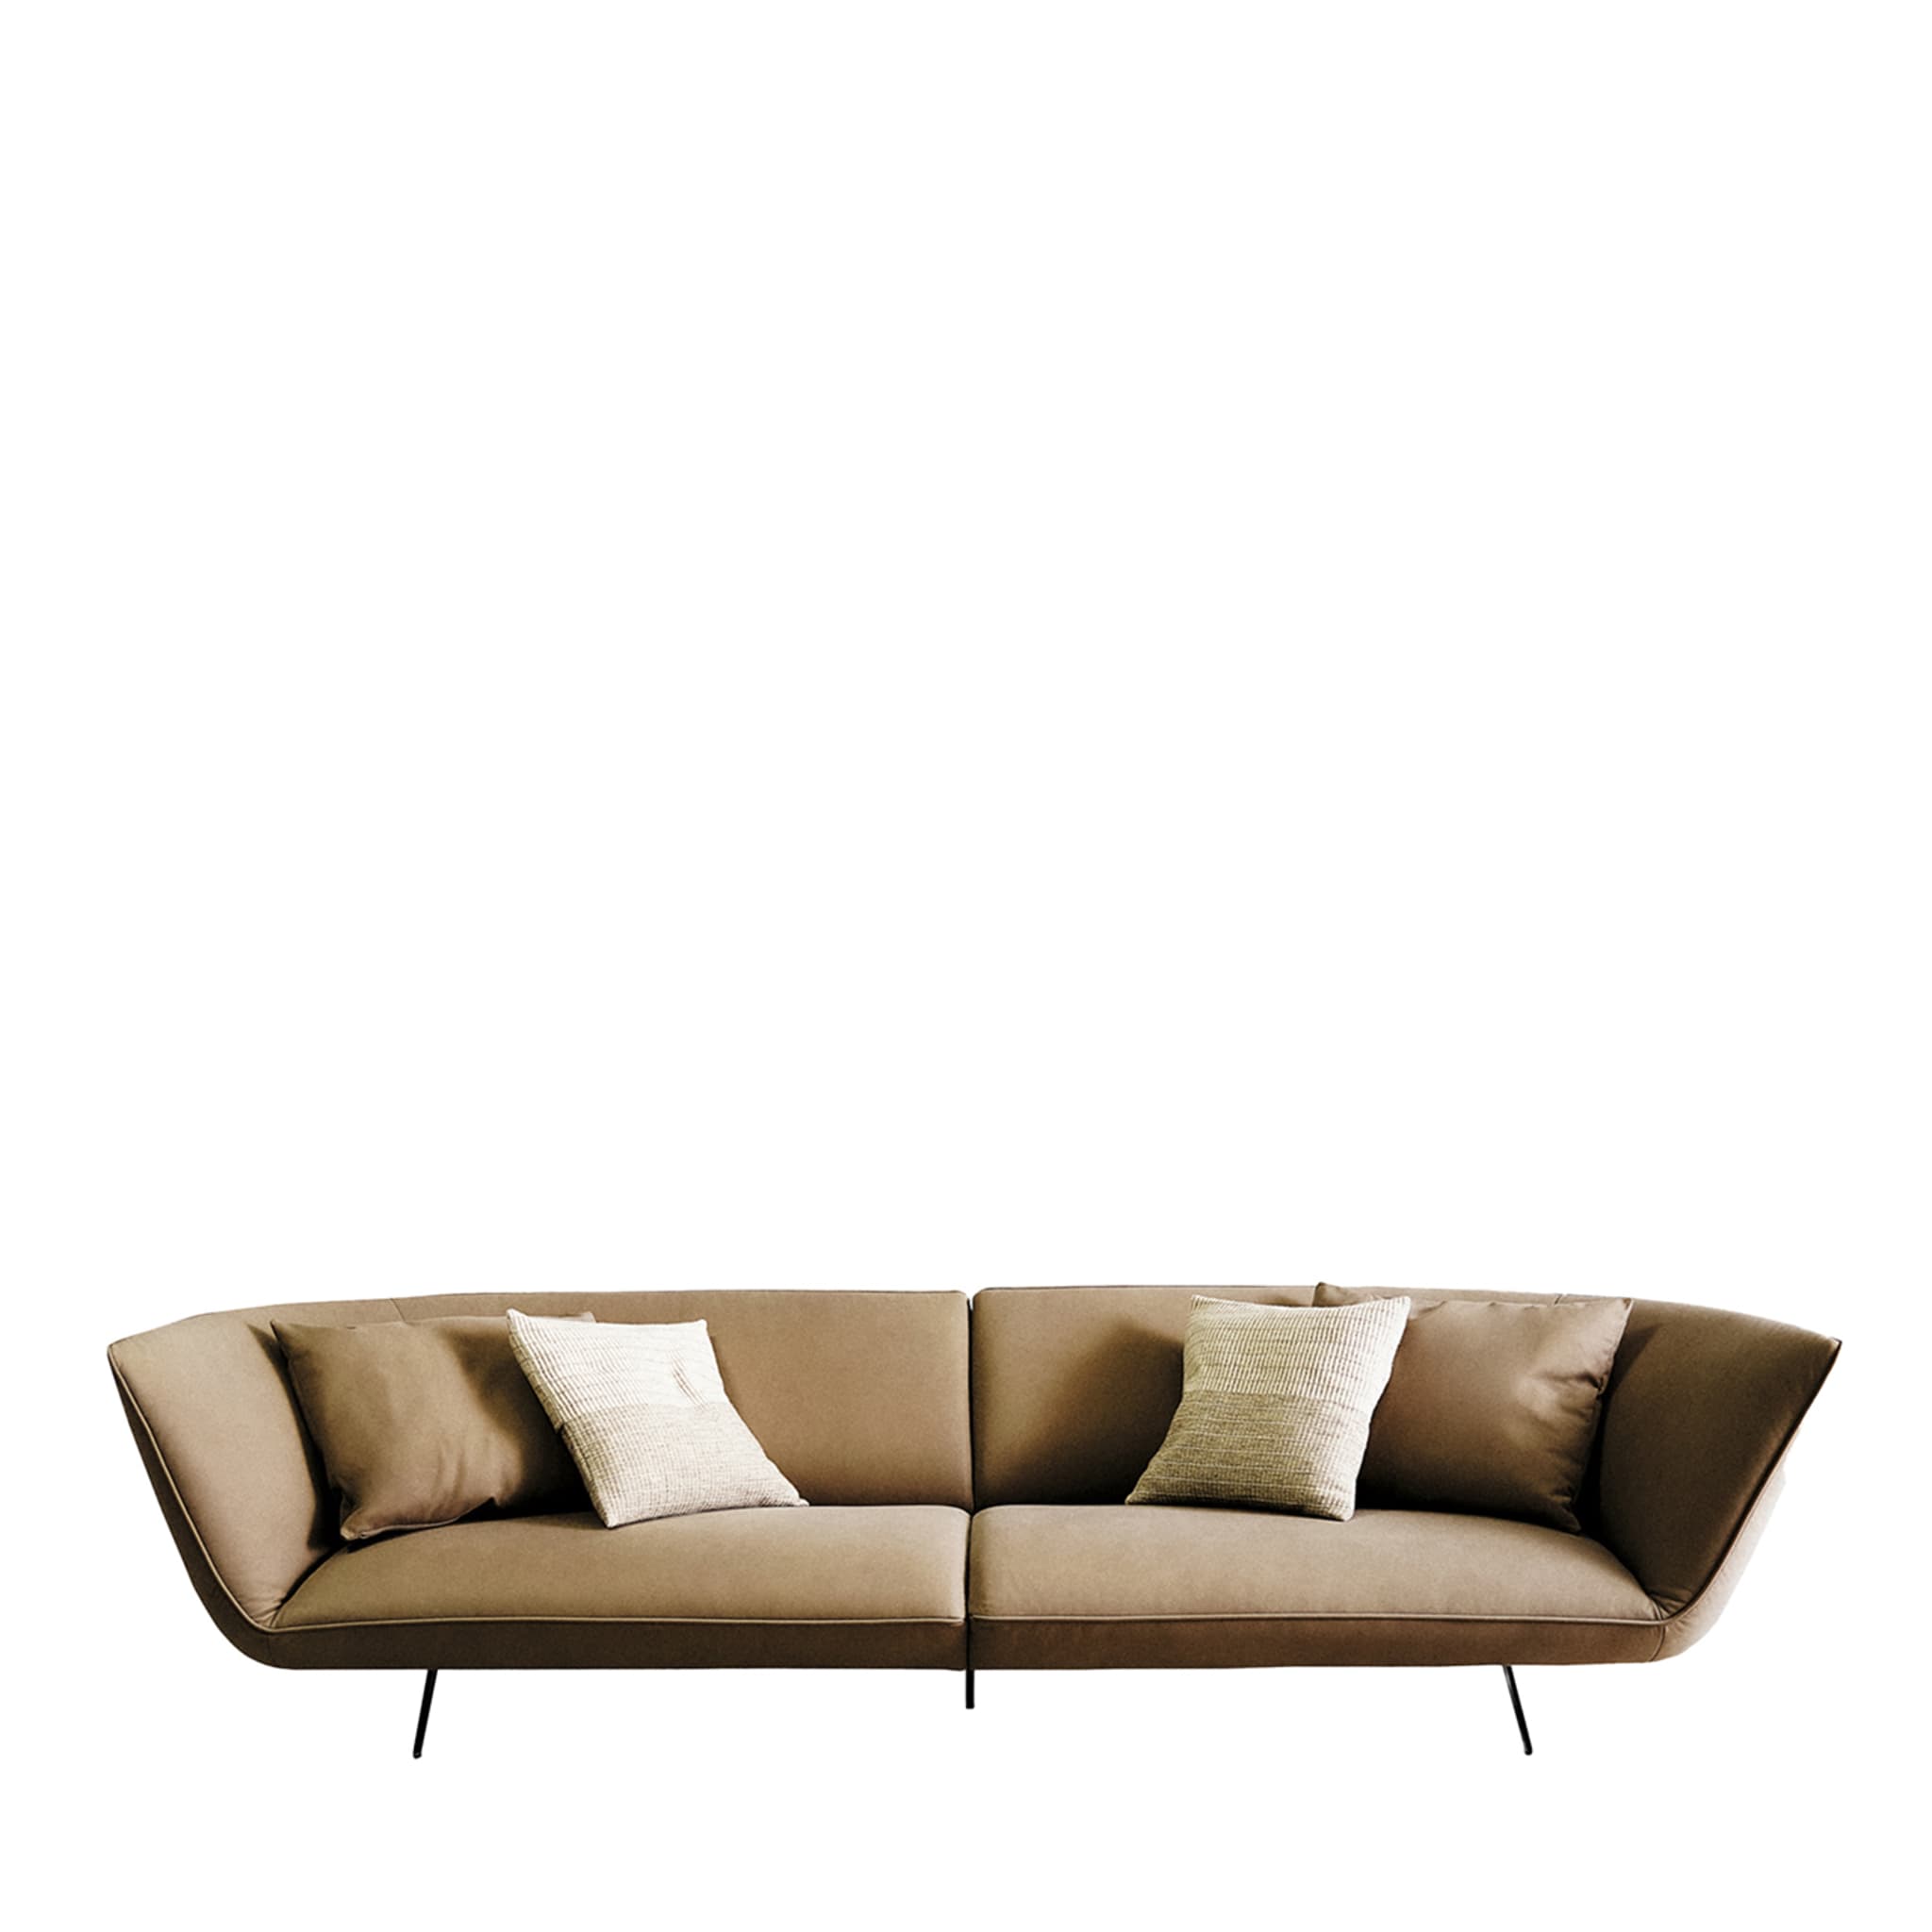 Athene 3-Seater Leather Sofa by Ludovica + Roberto Palomba - Main view